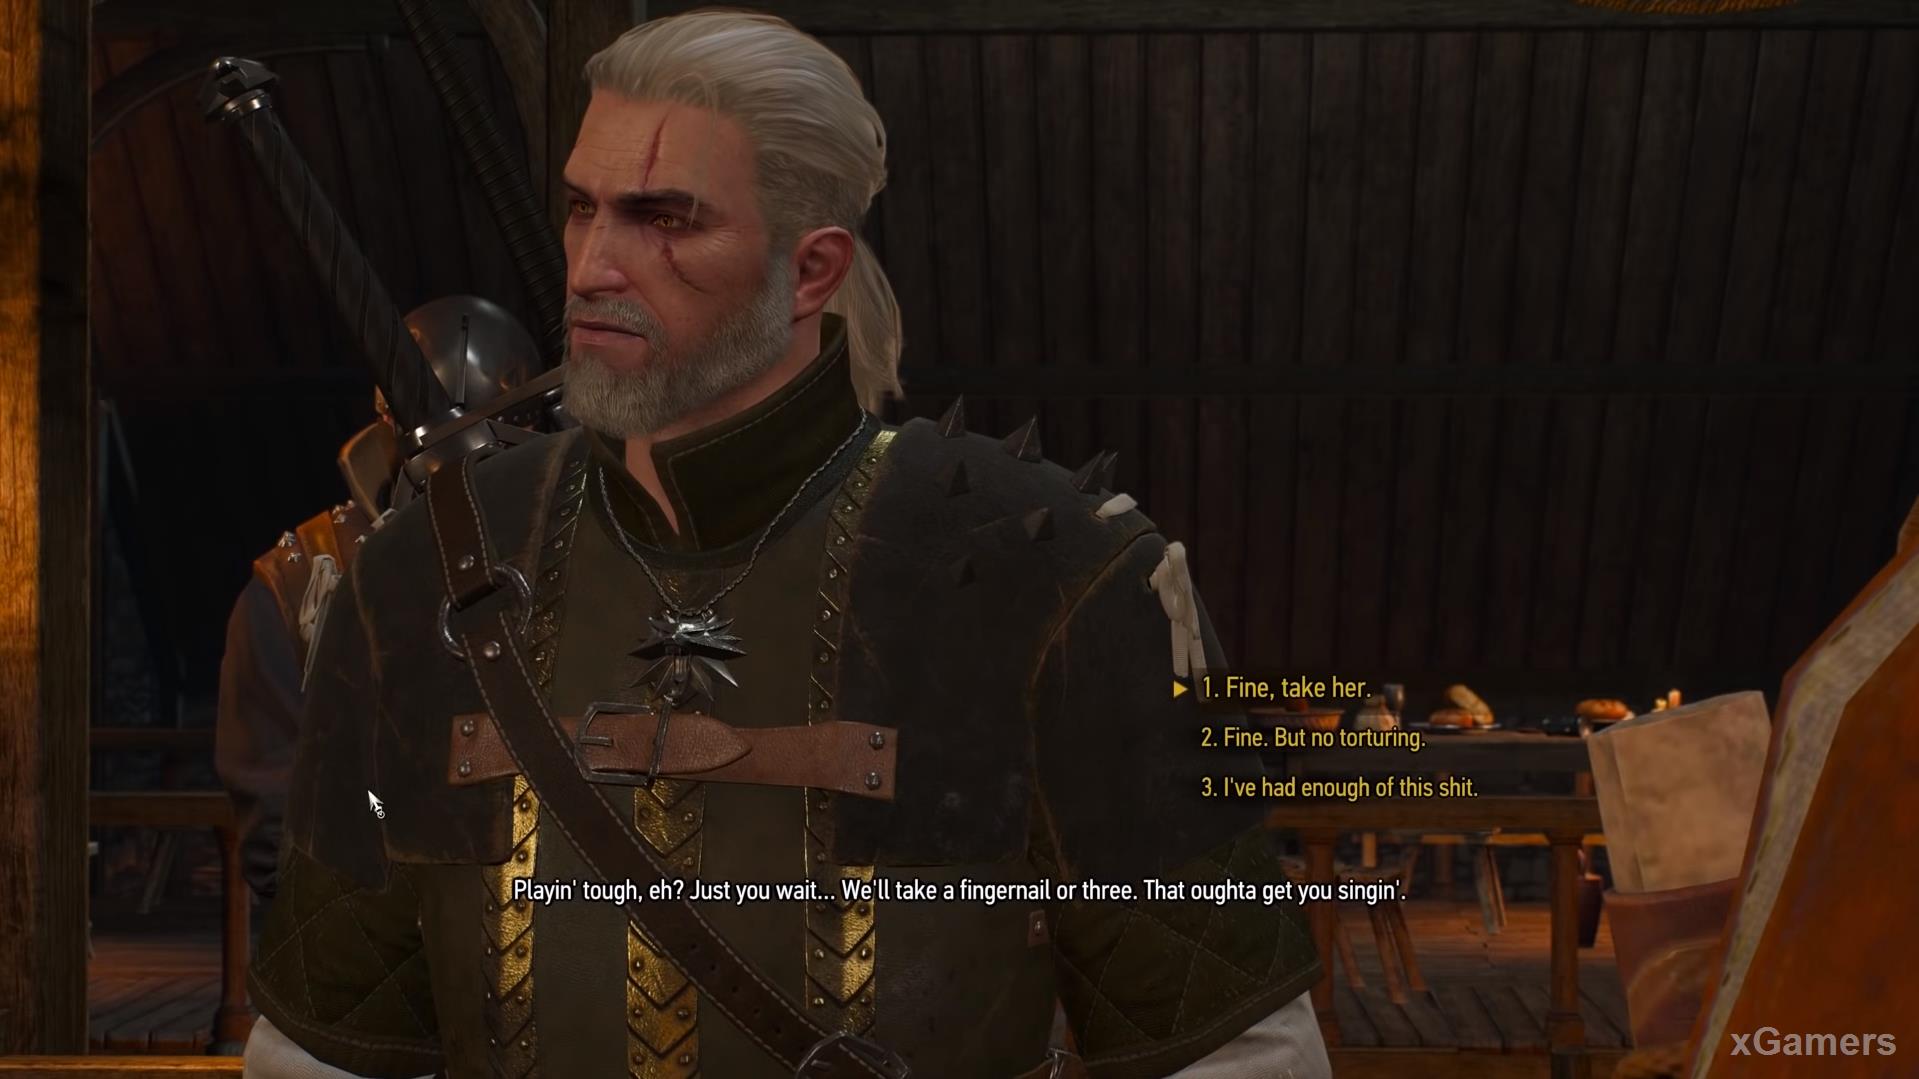 Geralt must continue to ignore the danger to Triss.